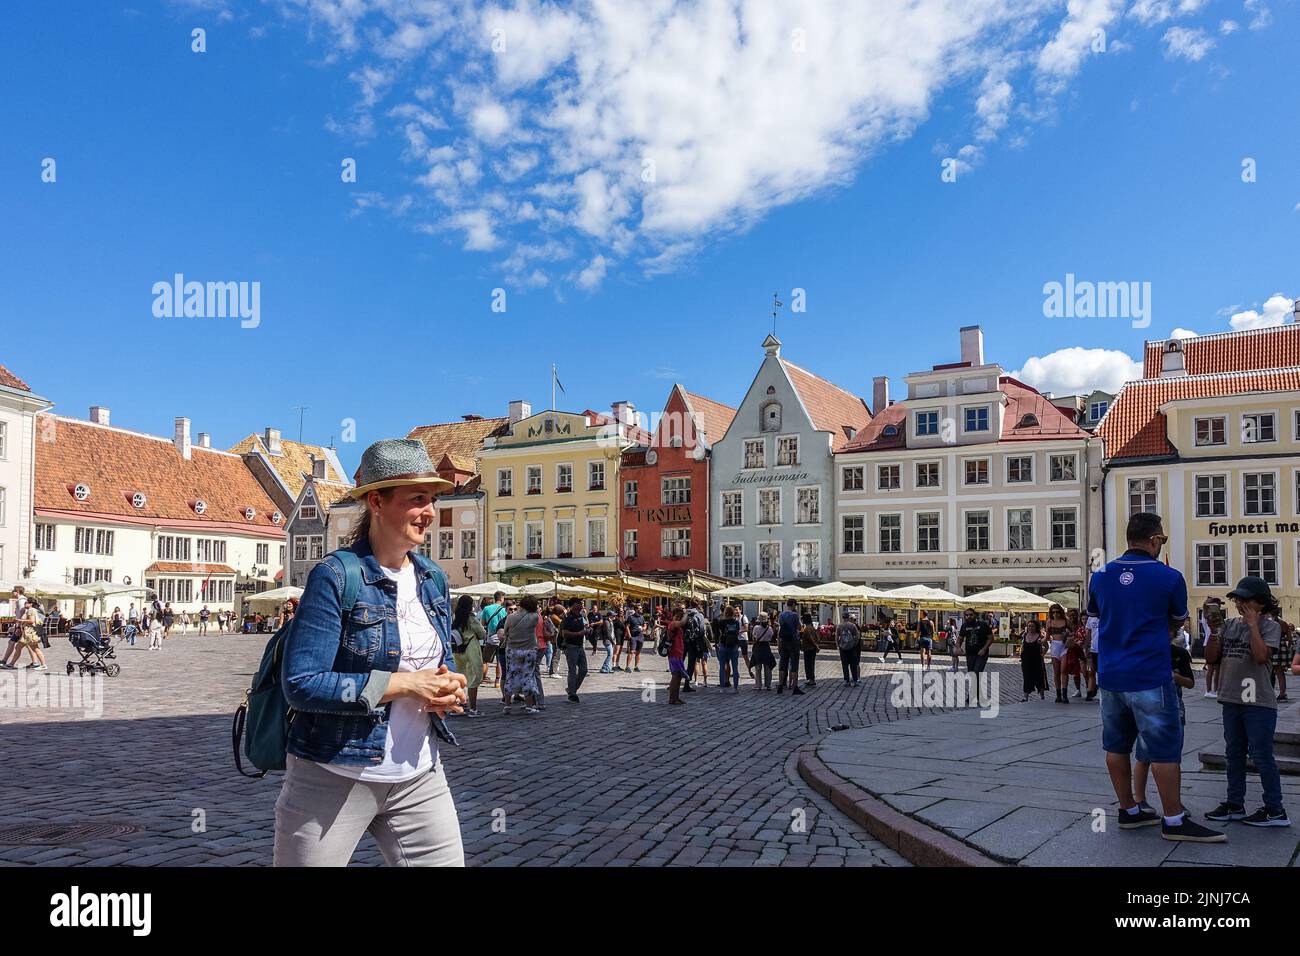 Tallinn, Estonia. 31st July, 2022. General view of the old town squre with open air restaurants and not so many touritst visiting the city is seen in Tallinn, Estonia on 31 July 2022 (Photo by Vadim Pacajev/Sipa USA) Credit: Sipa USA/Alamy Live News Stock Photo